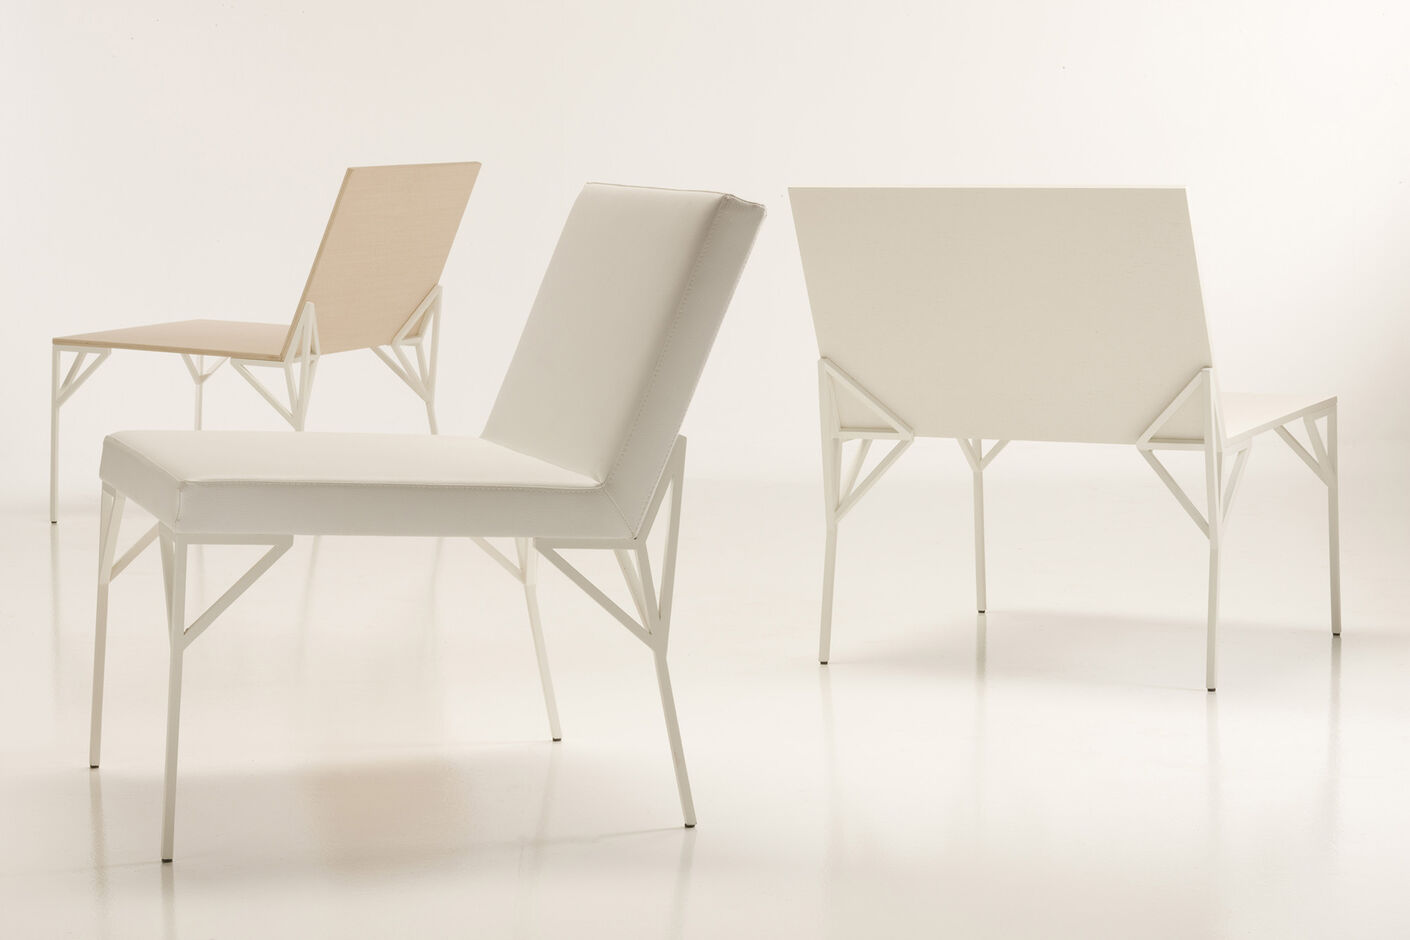 ubstance, lounge chair (2008)